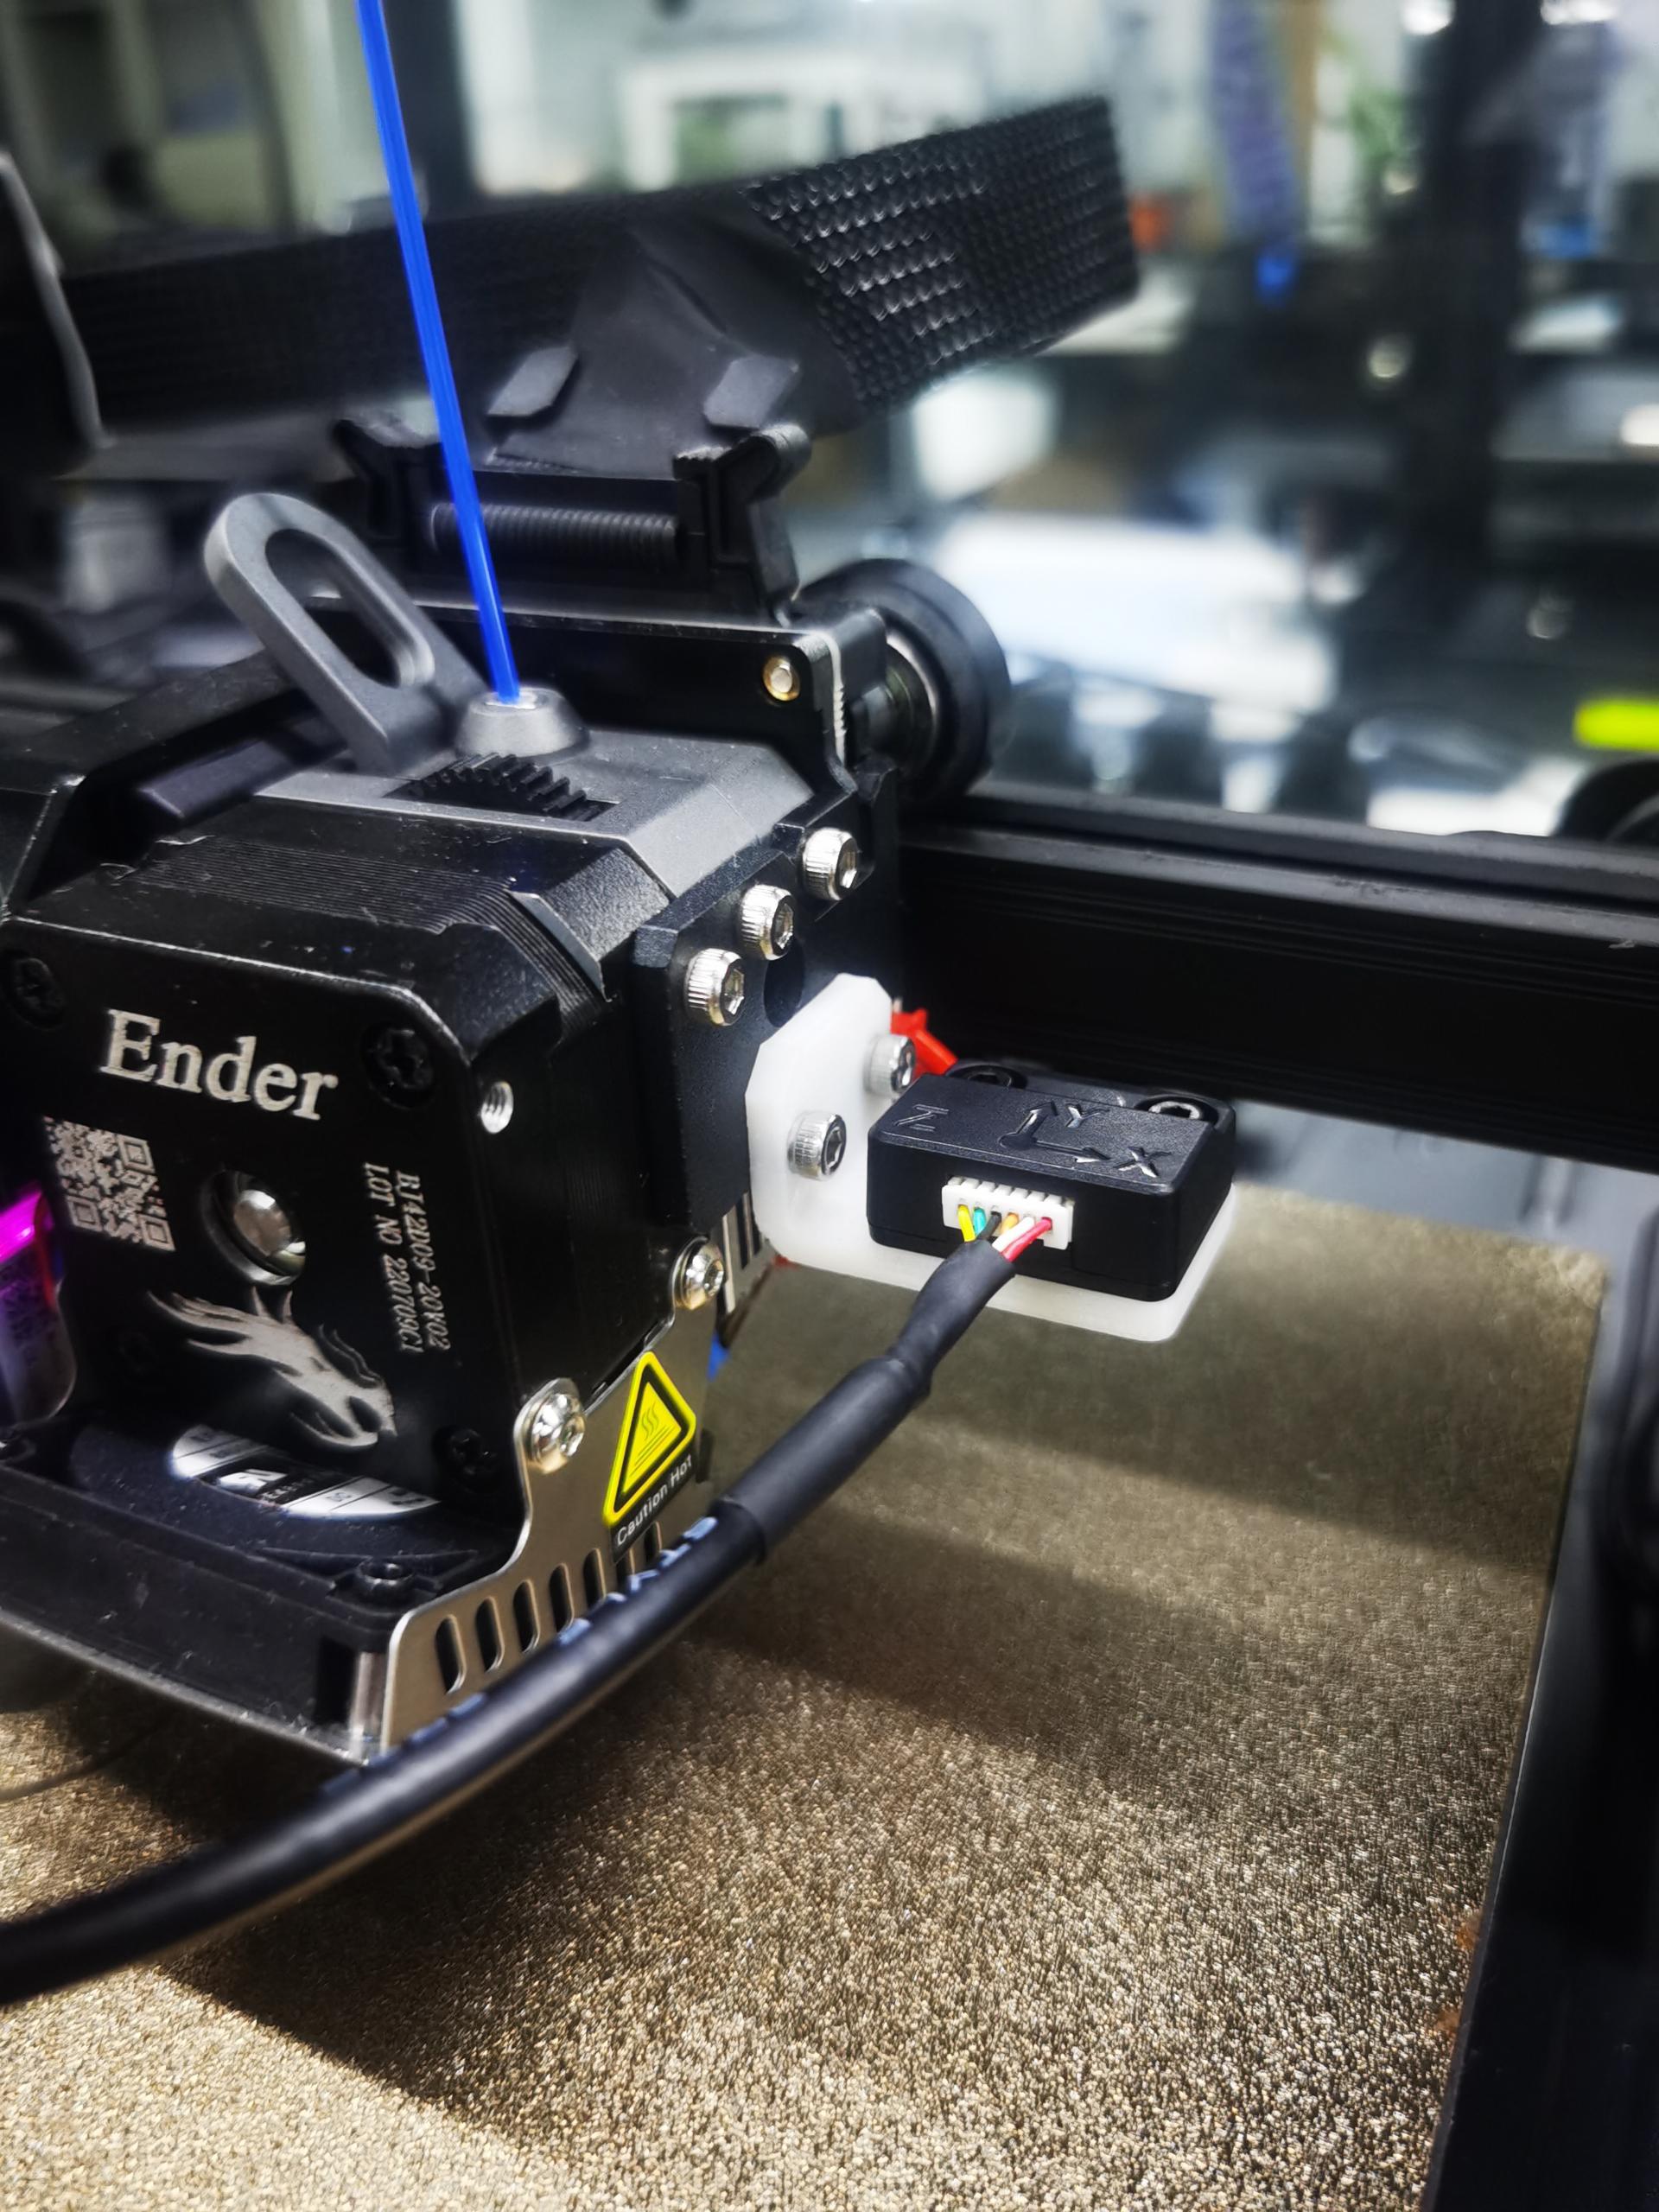 Sensor bracket Ender3 S1Ender3 S1 Pro | Creality Sonic Pad Review: Klipper Firmware with Compromises